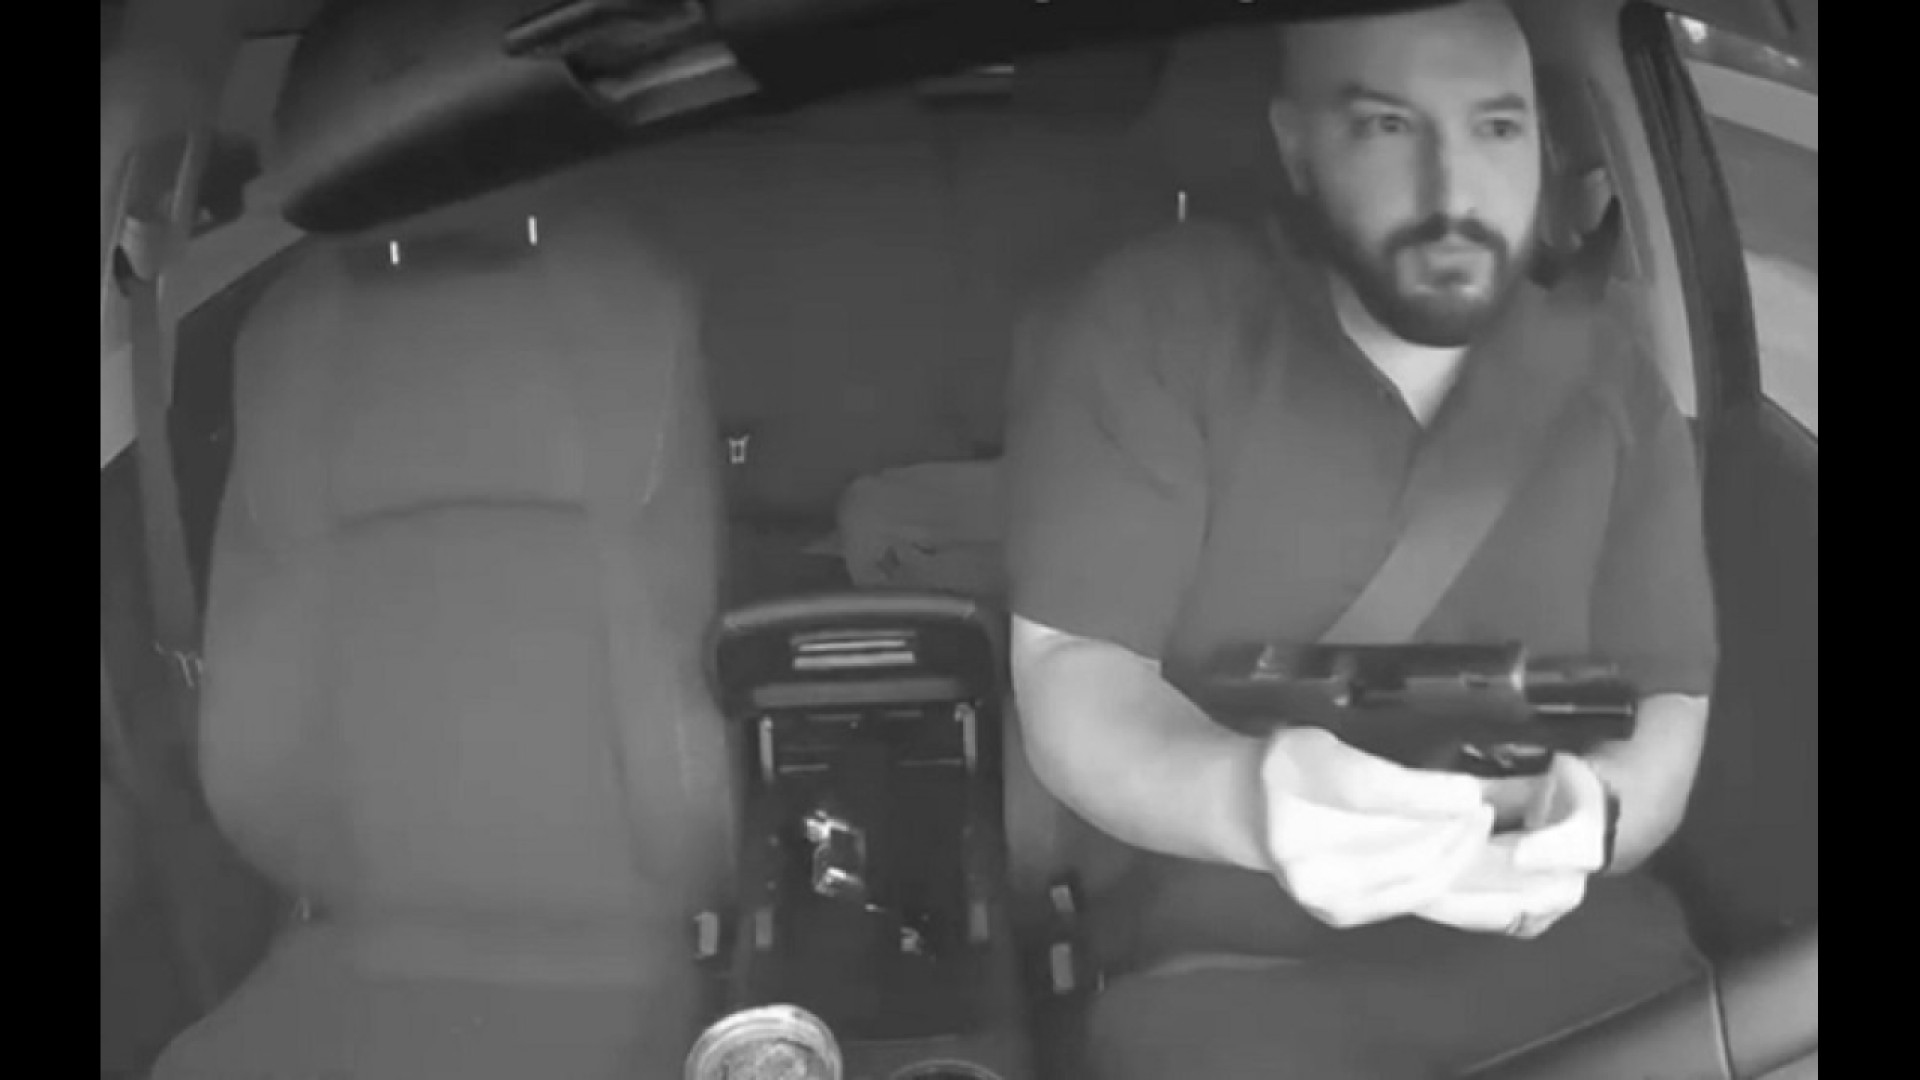 Watch this: Video from inside shooter's car captures road rage incident